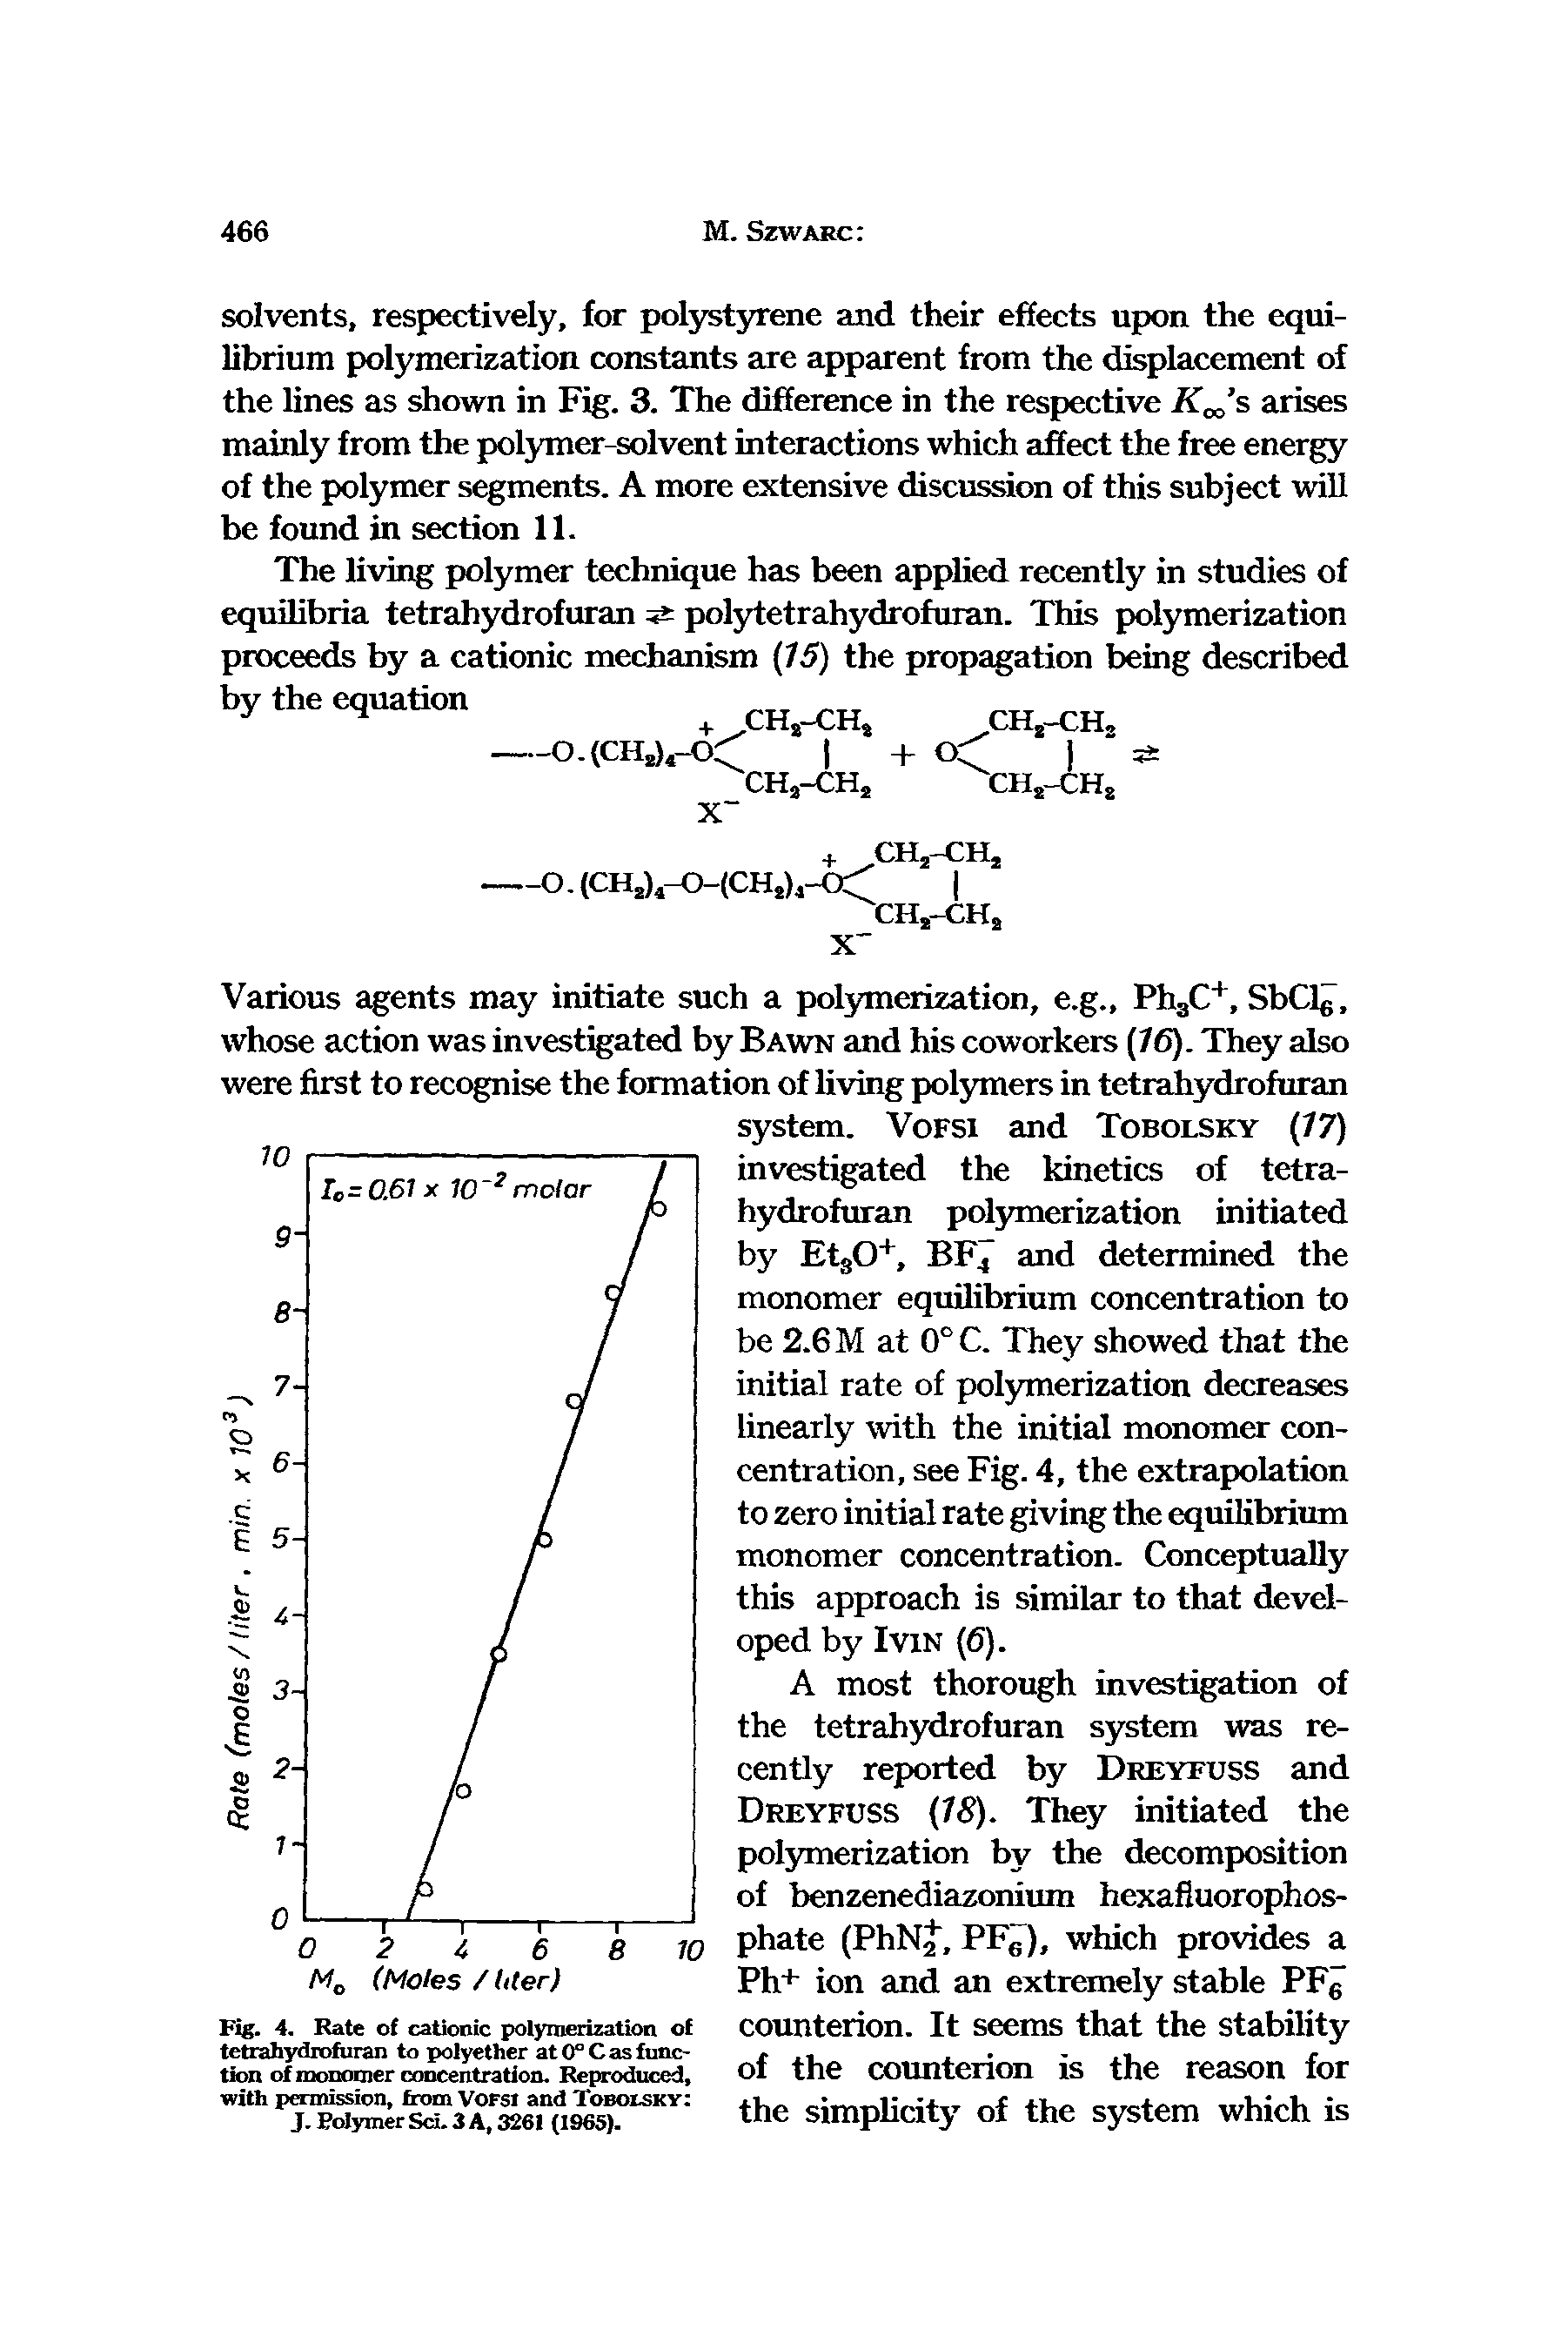 Fig. 4. Rate of cationic polymerization of tetrahydrofuran to polyether at 0° C as function of monomer concentration. Reproduced, with permission, from Vofsi and Tobolsky J. Polymer ScL 3 A, 3261 (1965).